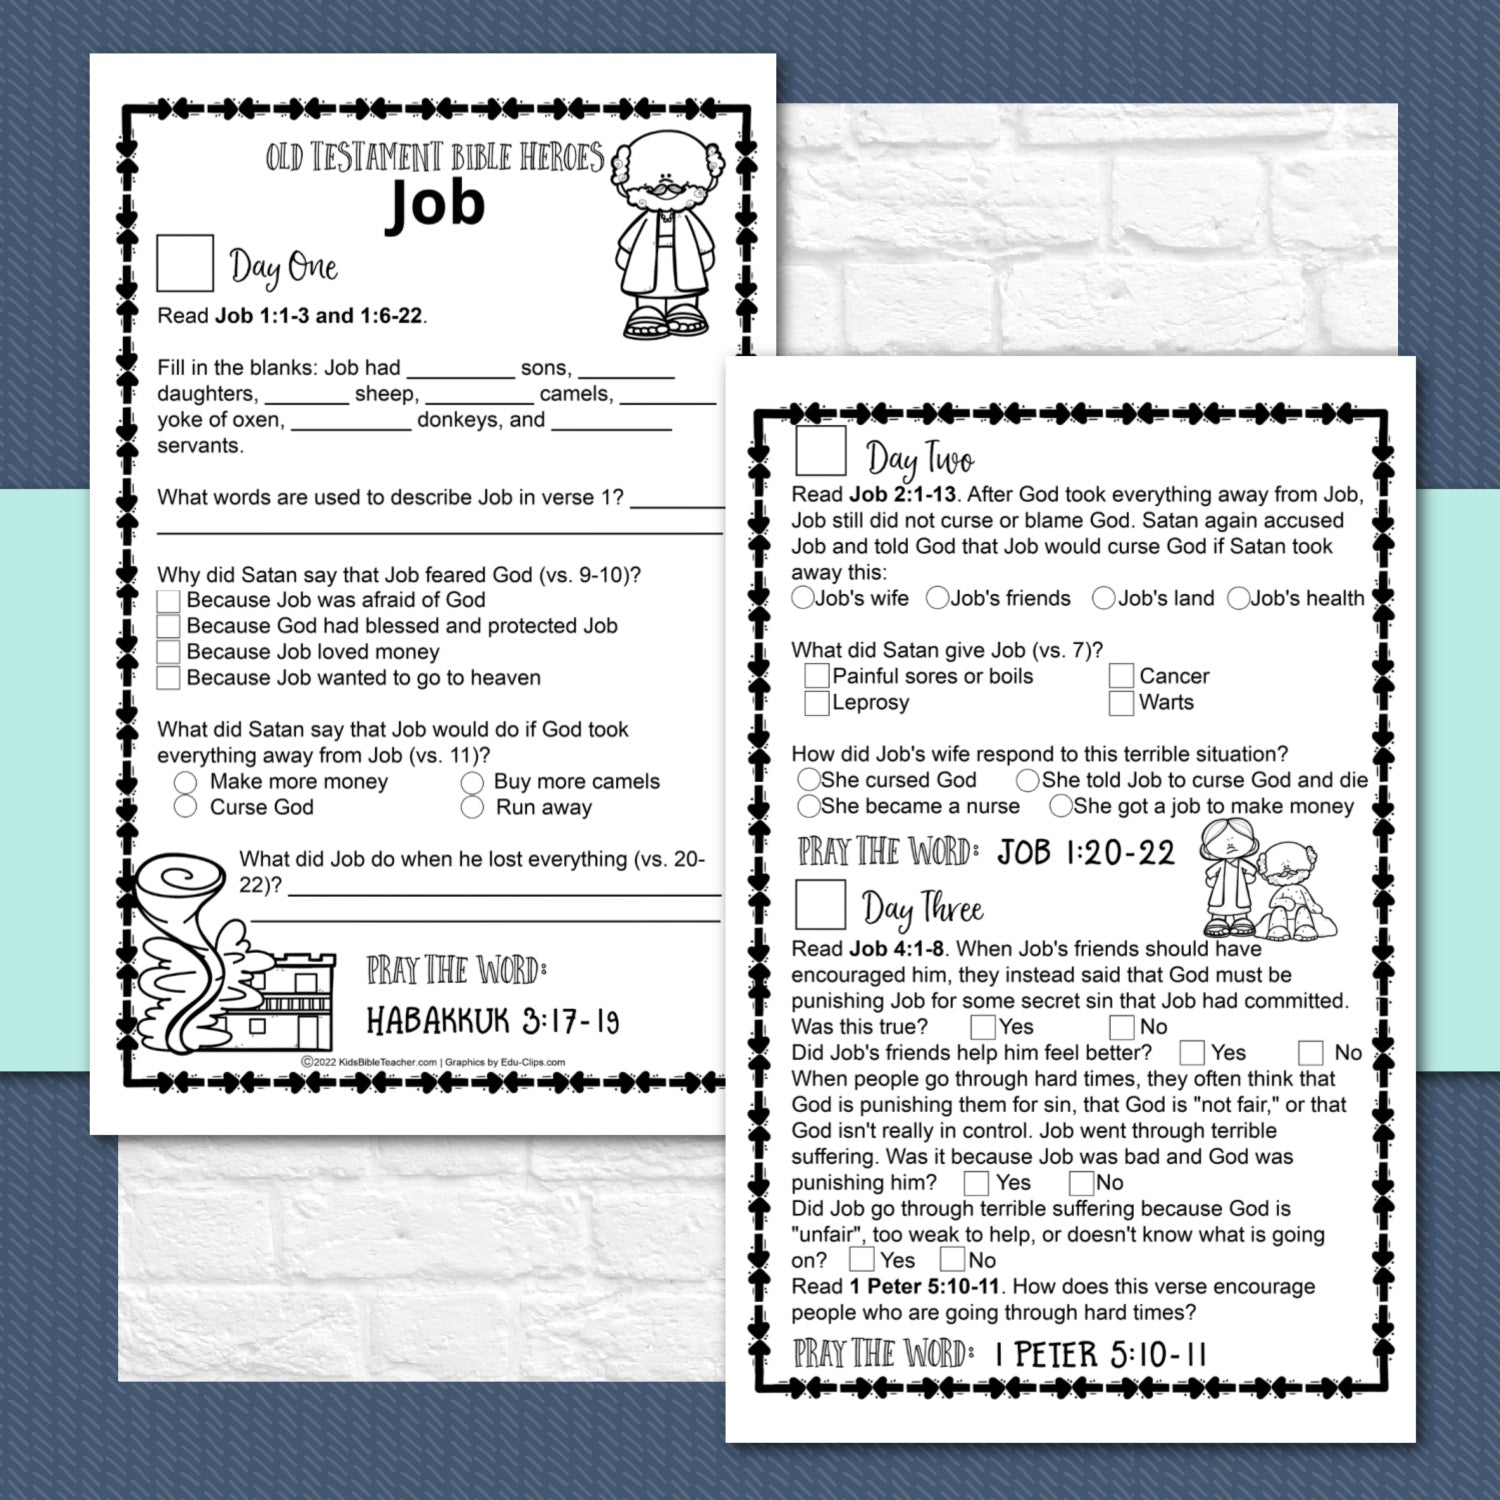 Story of Job Bible Reading Pages - 1 Week Bible Reading Plan for 1st - 6th Grade